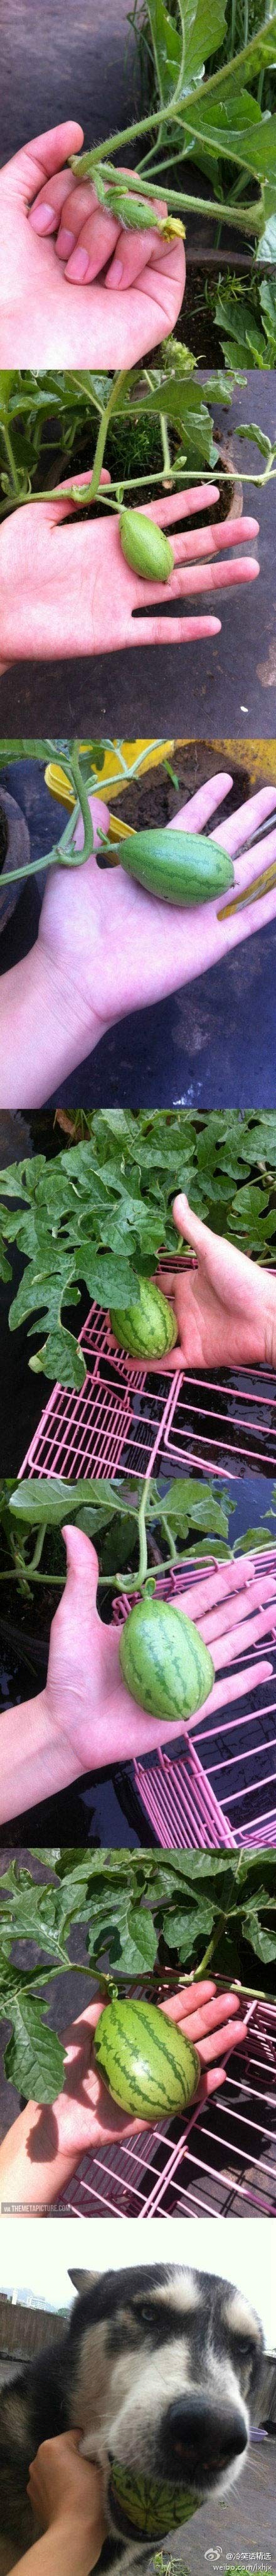 Trying to grow watermelons, when suddenly…